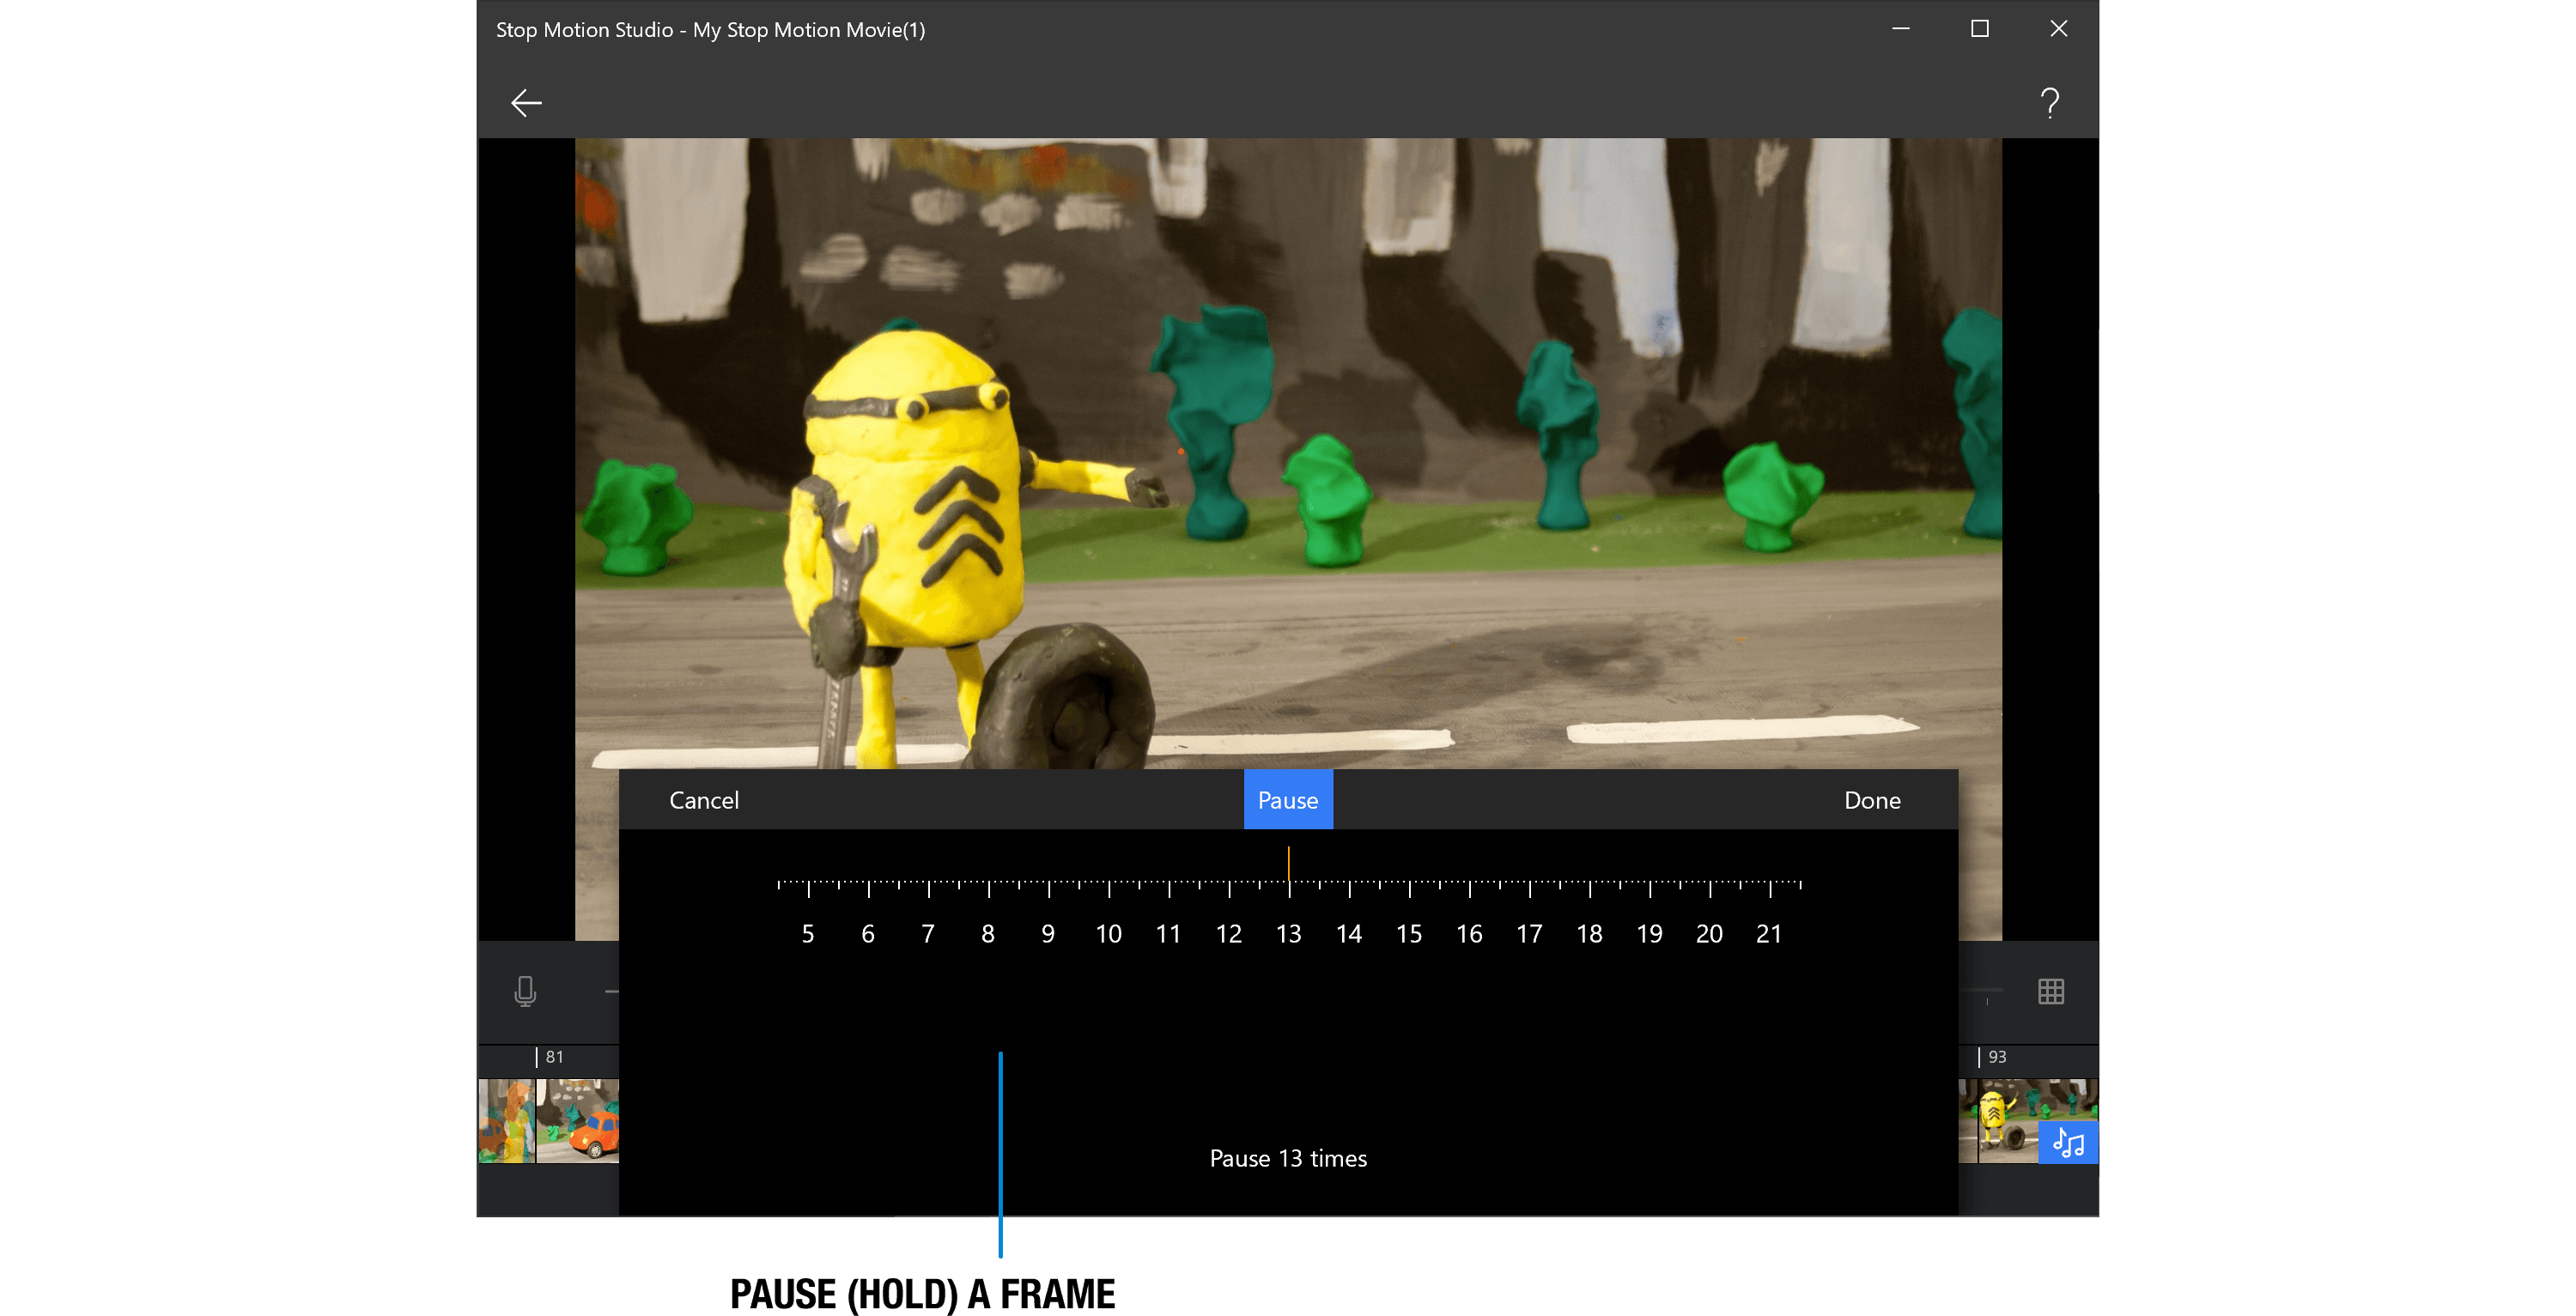 Stop Motion Studio for Windows - Hold or Pause a Frame